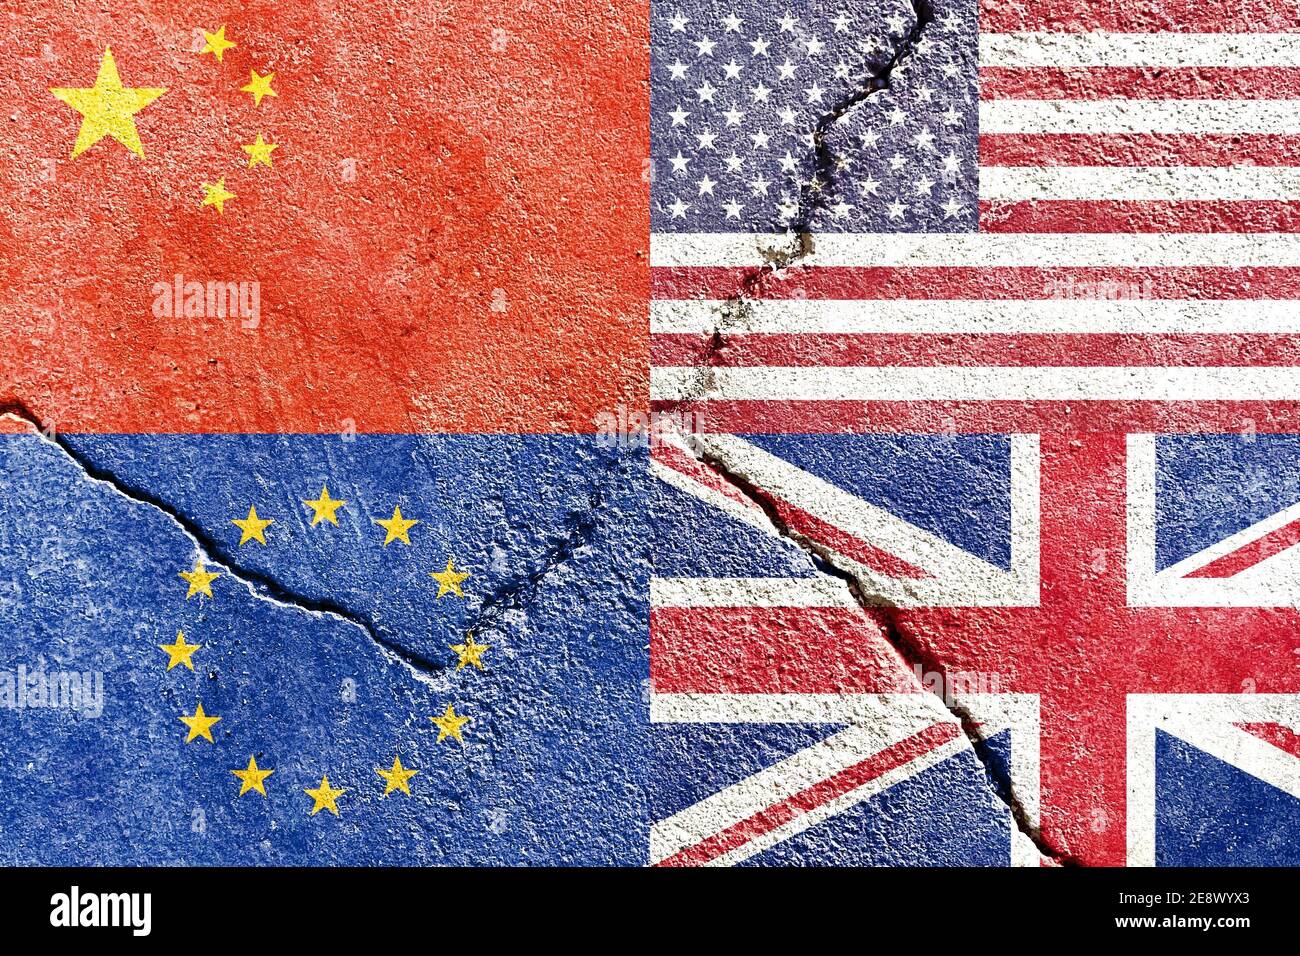 Closeup of USA, China, EU, and UK flags on weathered and cracked wall background Stock Photo